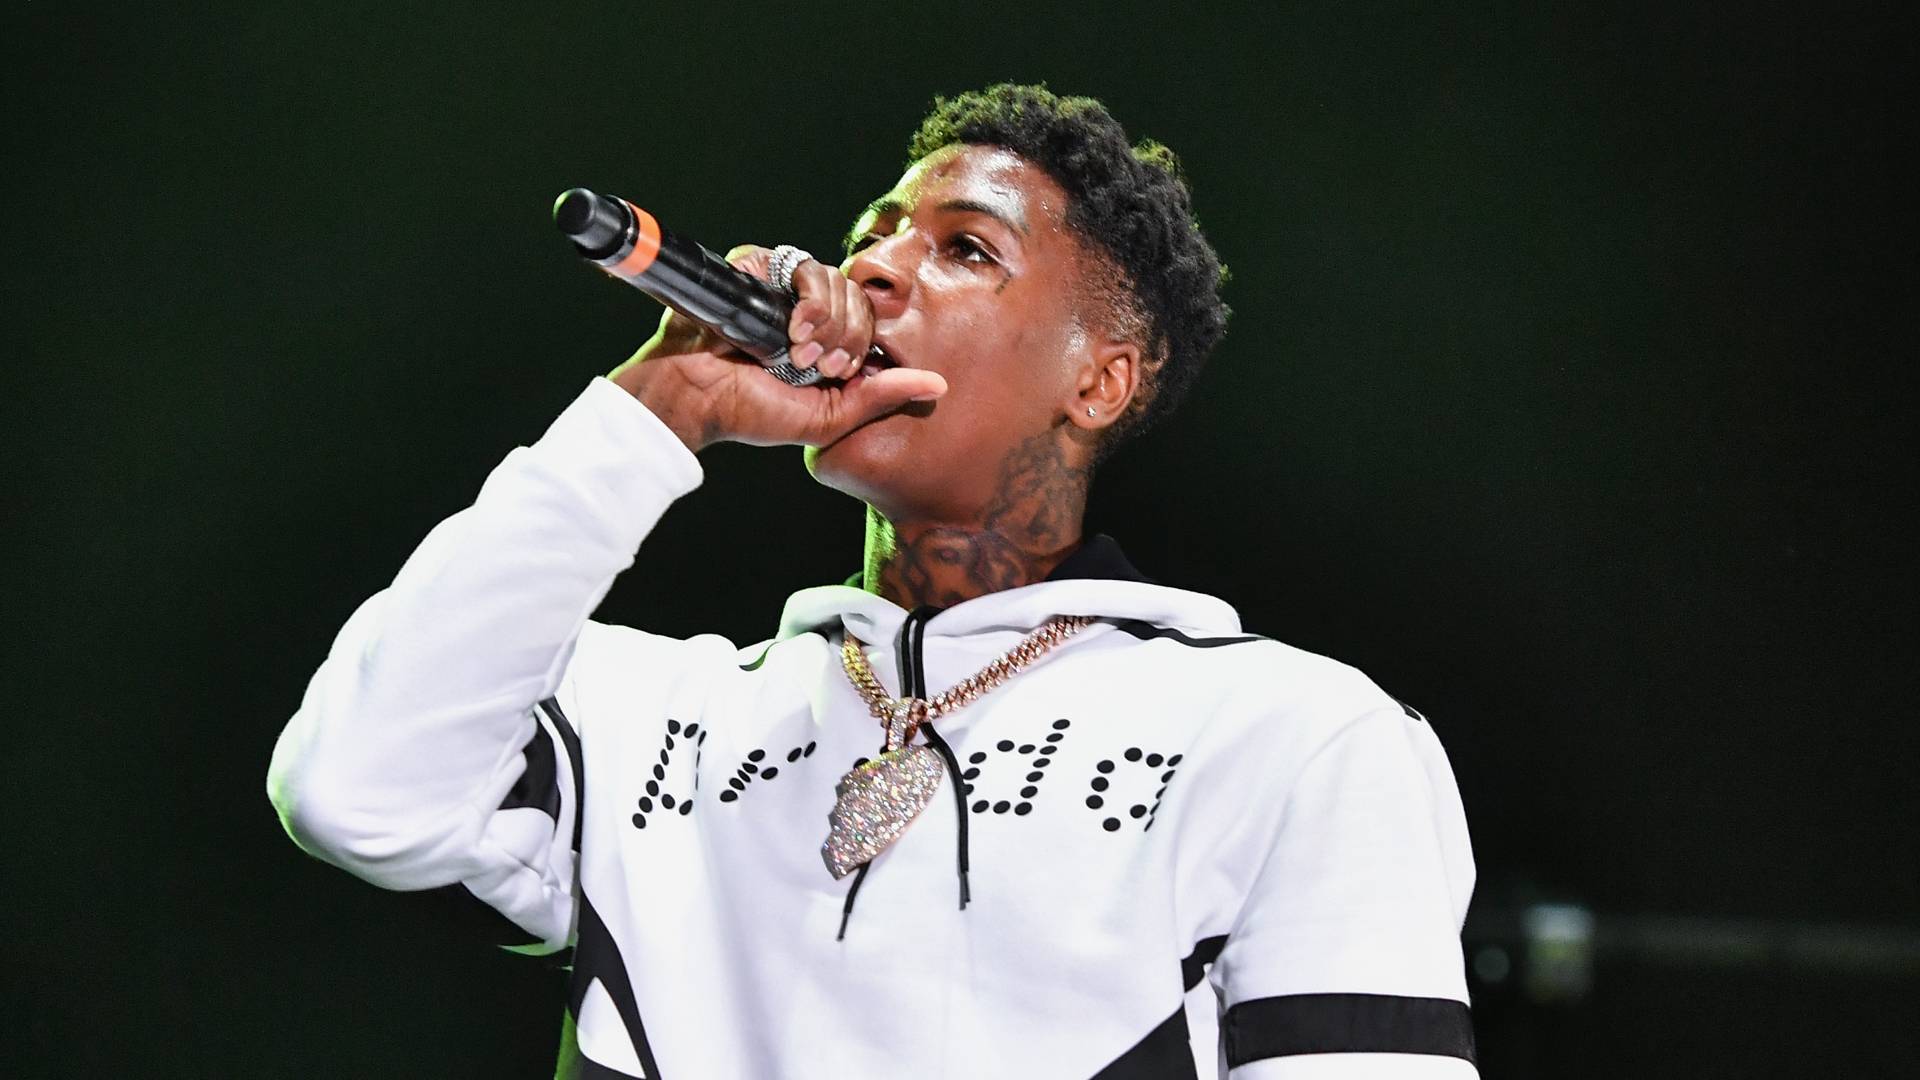 NBA YoungBoy performs during Lil WeezyAna at Champions Square on August 25, 2018 in New Orleans, Louisiana. 